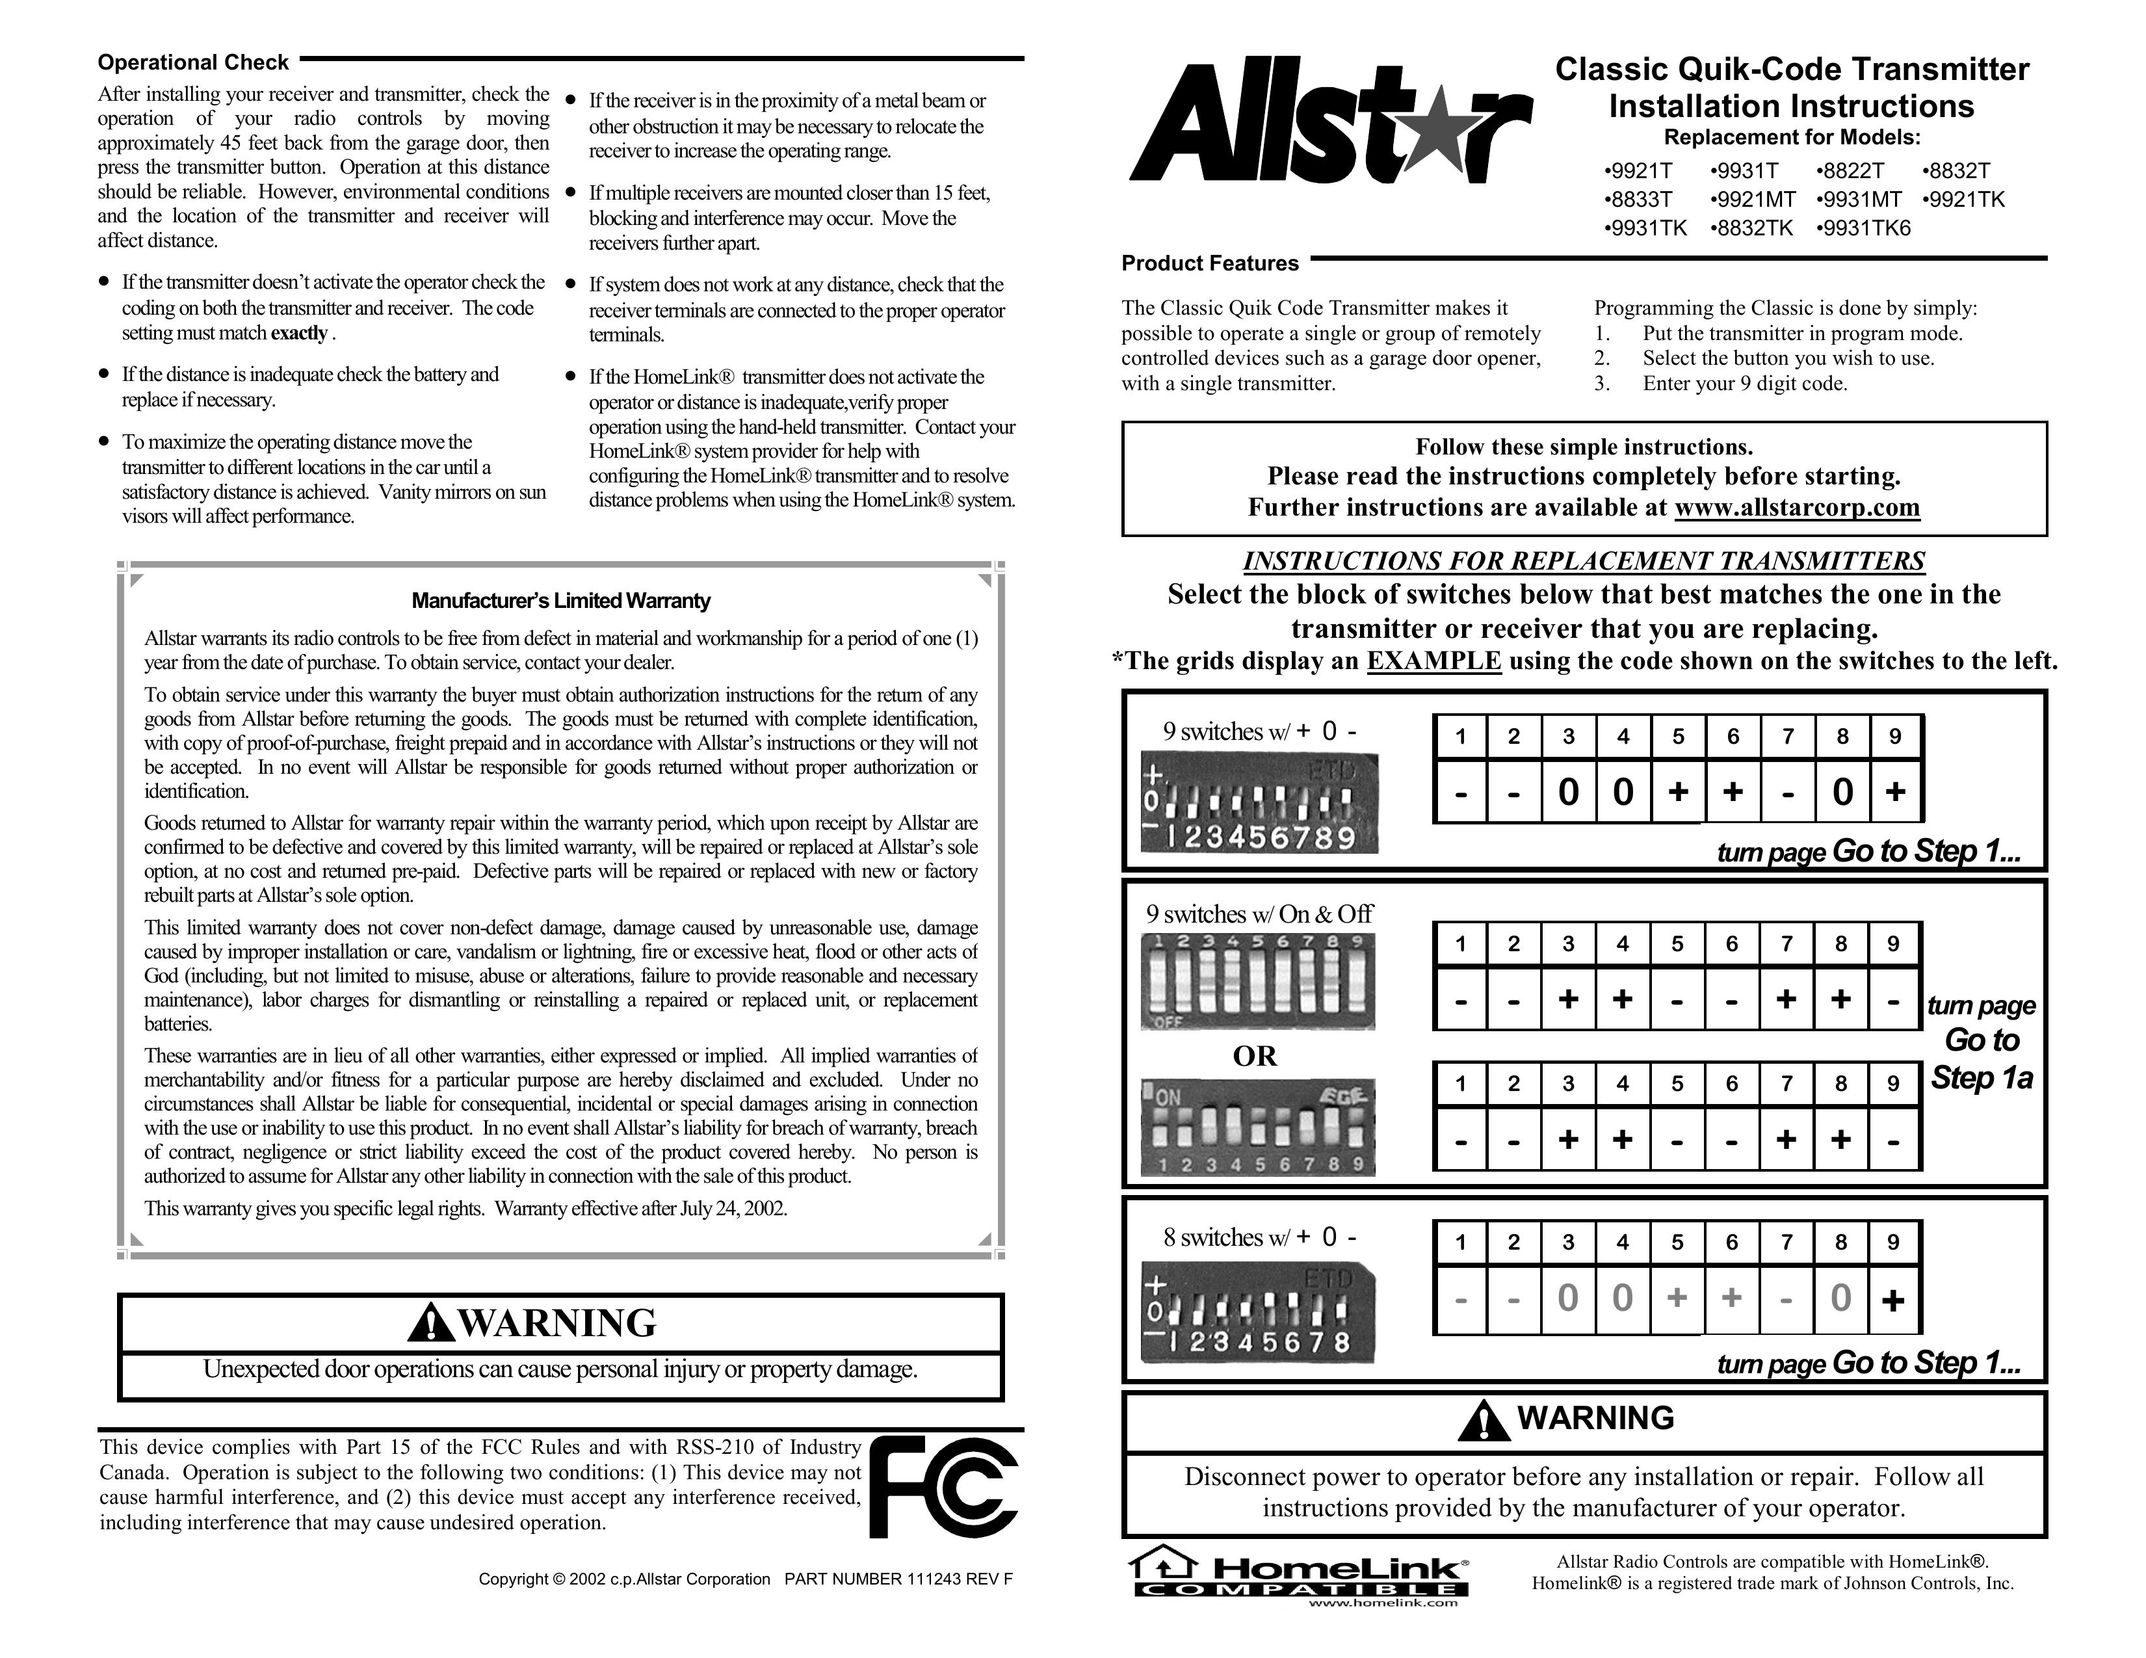 Allstar Products Group 8822T Satellite Radio User Manual